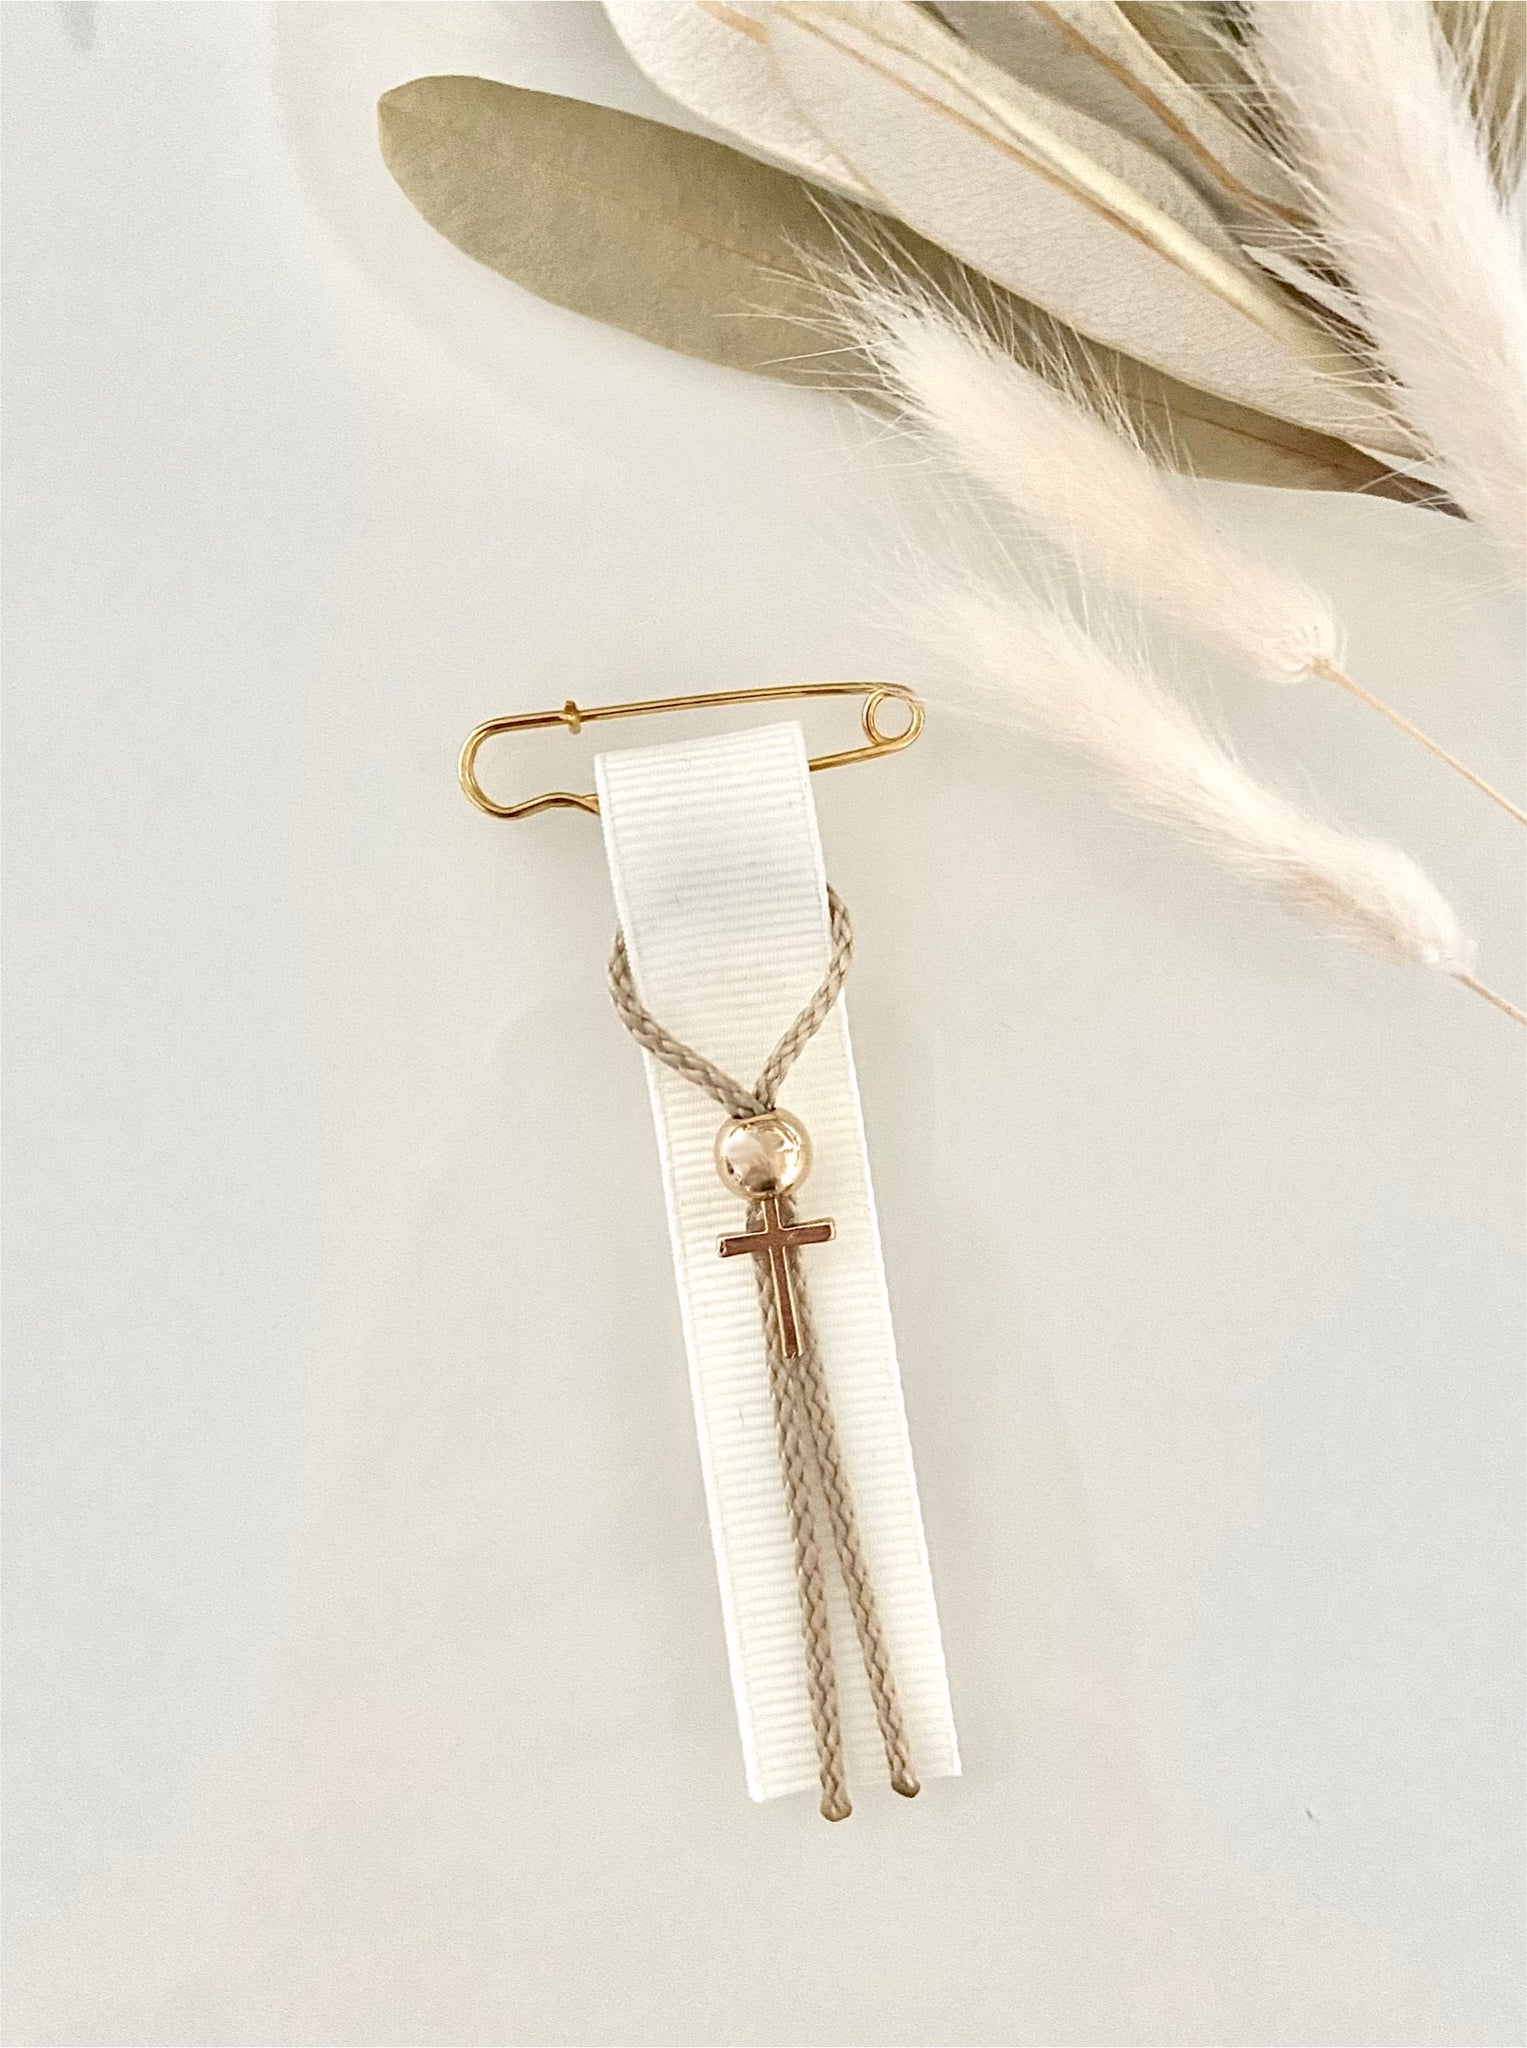 Ivory and Gold Cross Pin Martyiko/Witness Pin